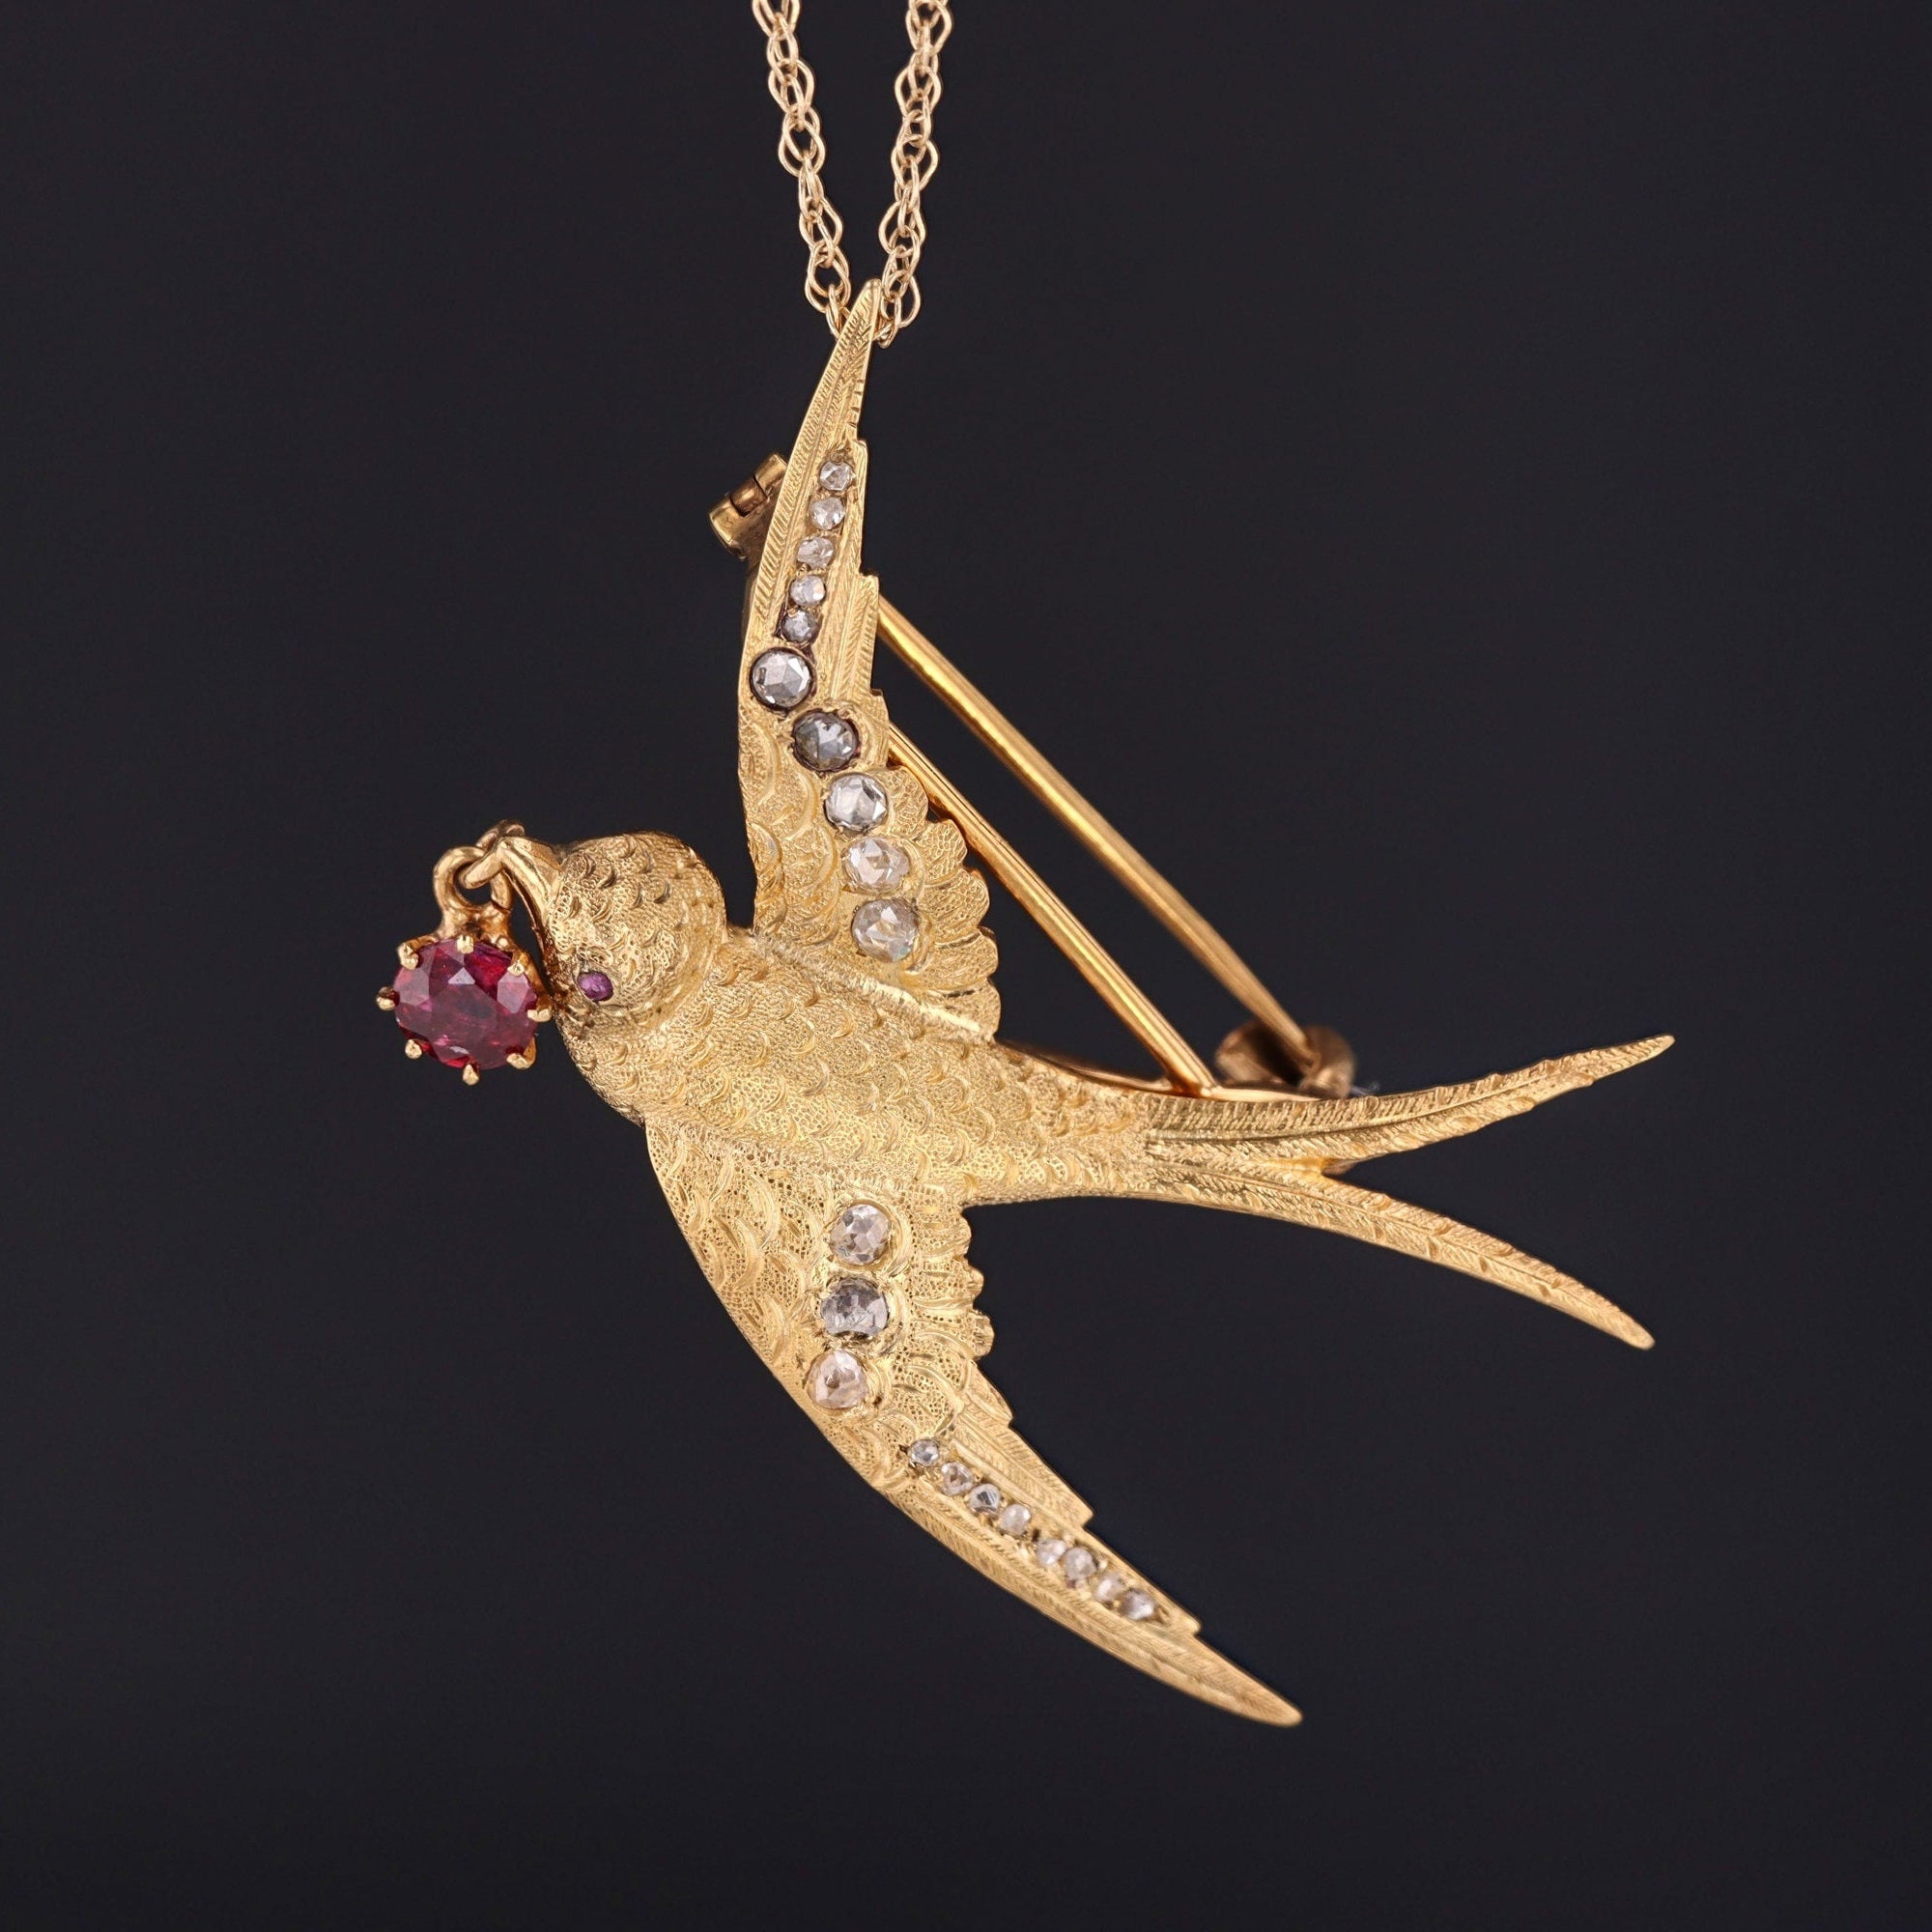 Antique Swallow Necklace or Brooch | 14k Gold Pendant with Optional 14k Chain 